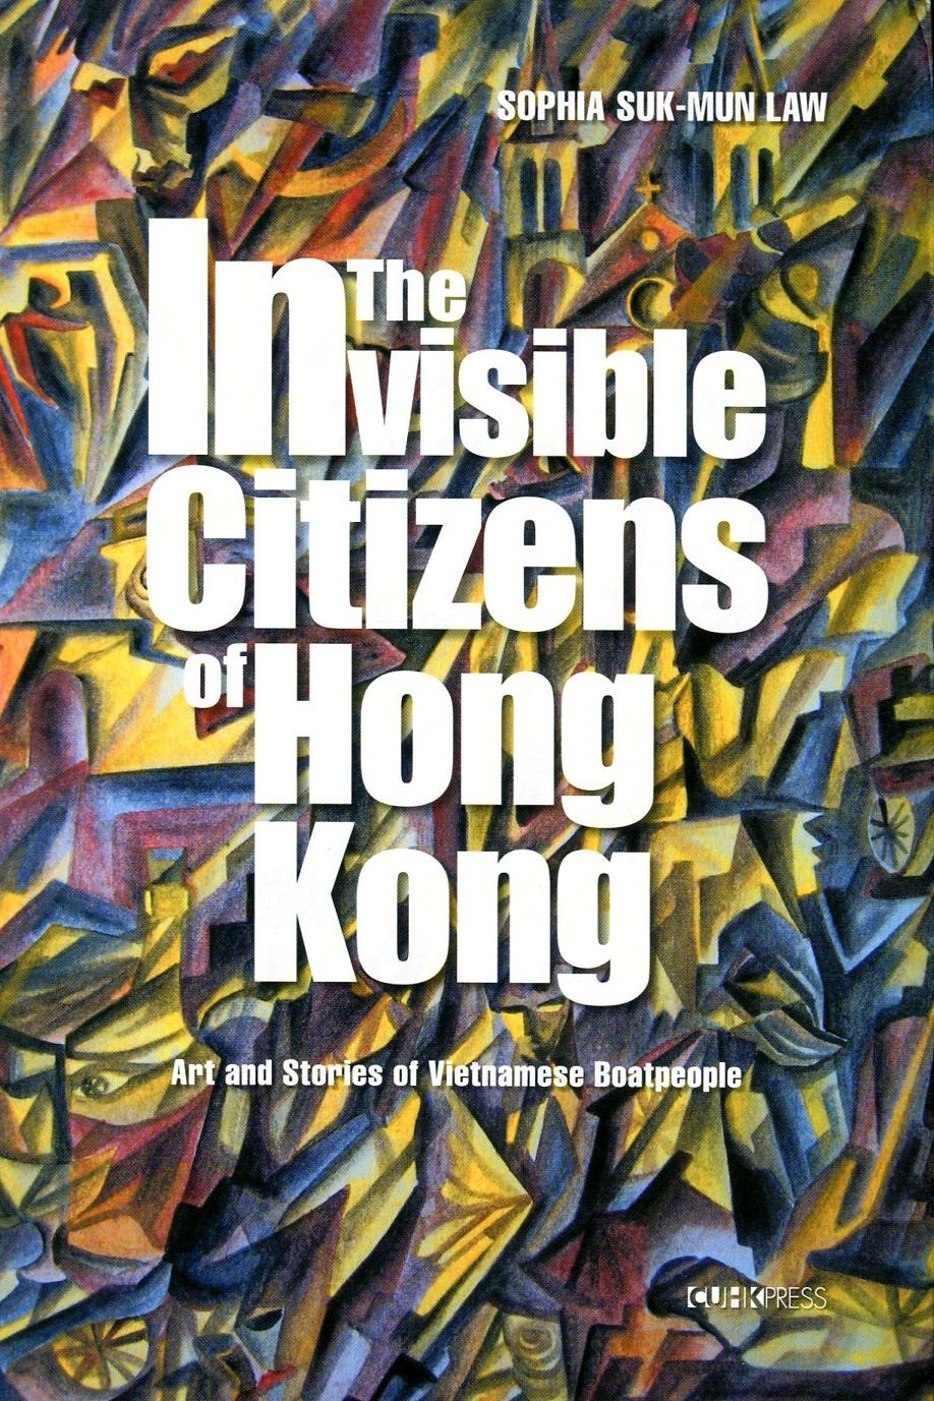 The Invisible Citizens of Hong Kong